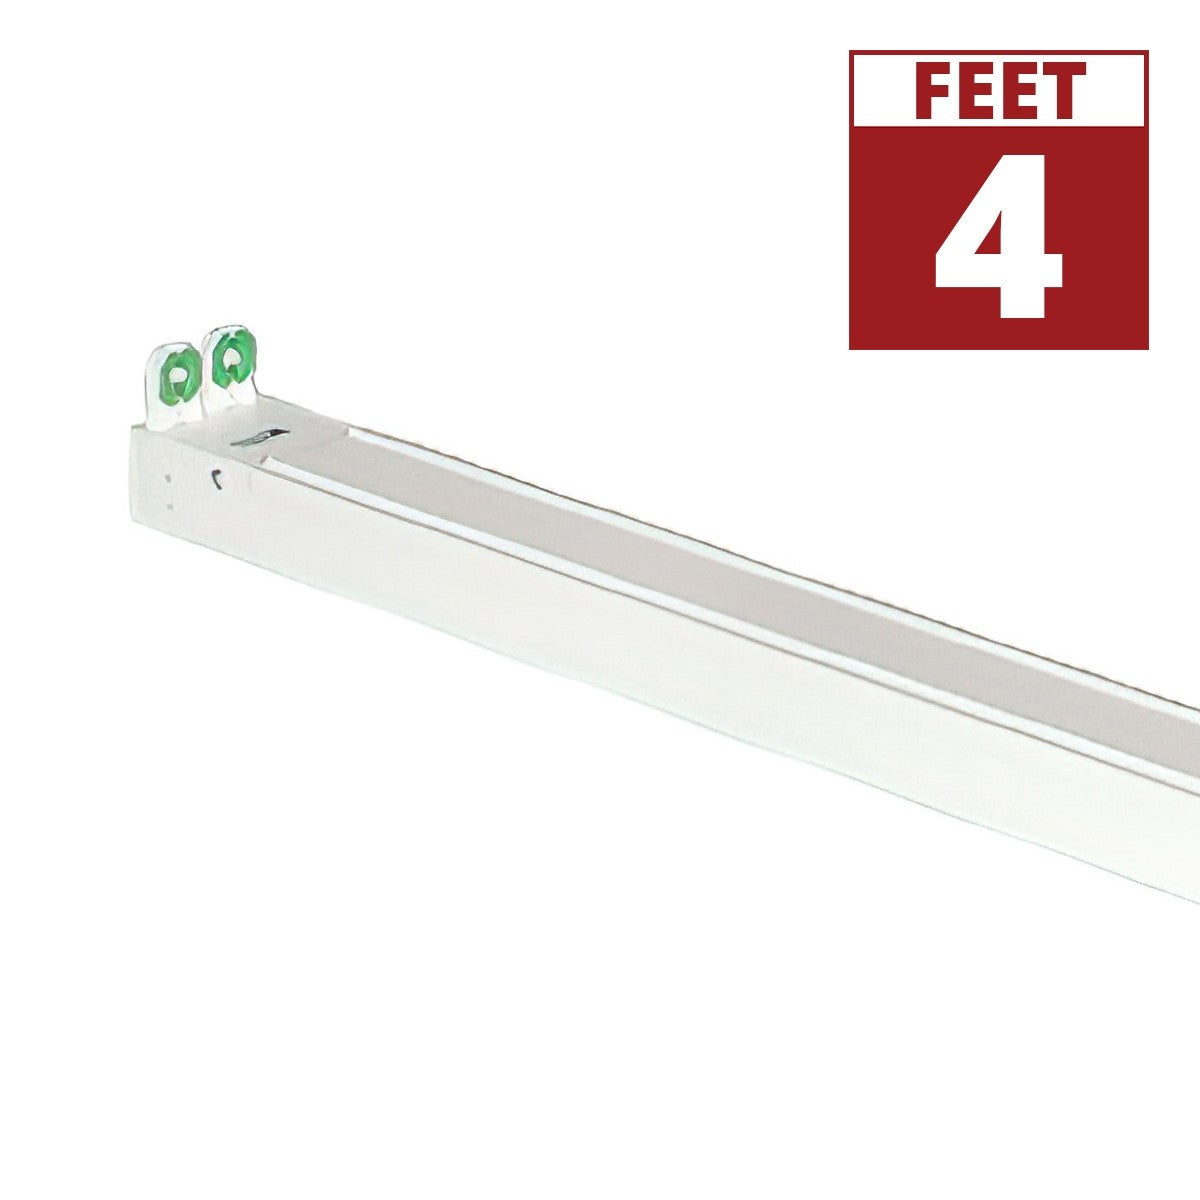 4ft LED Ready Strip Light 2-lamp Double End Wiring LED T8 Bulbs Not Included